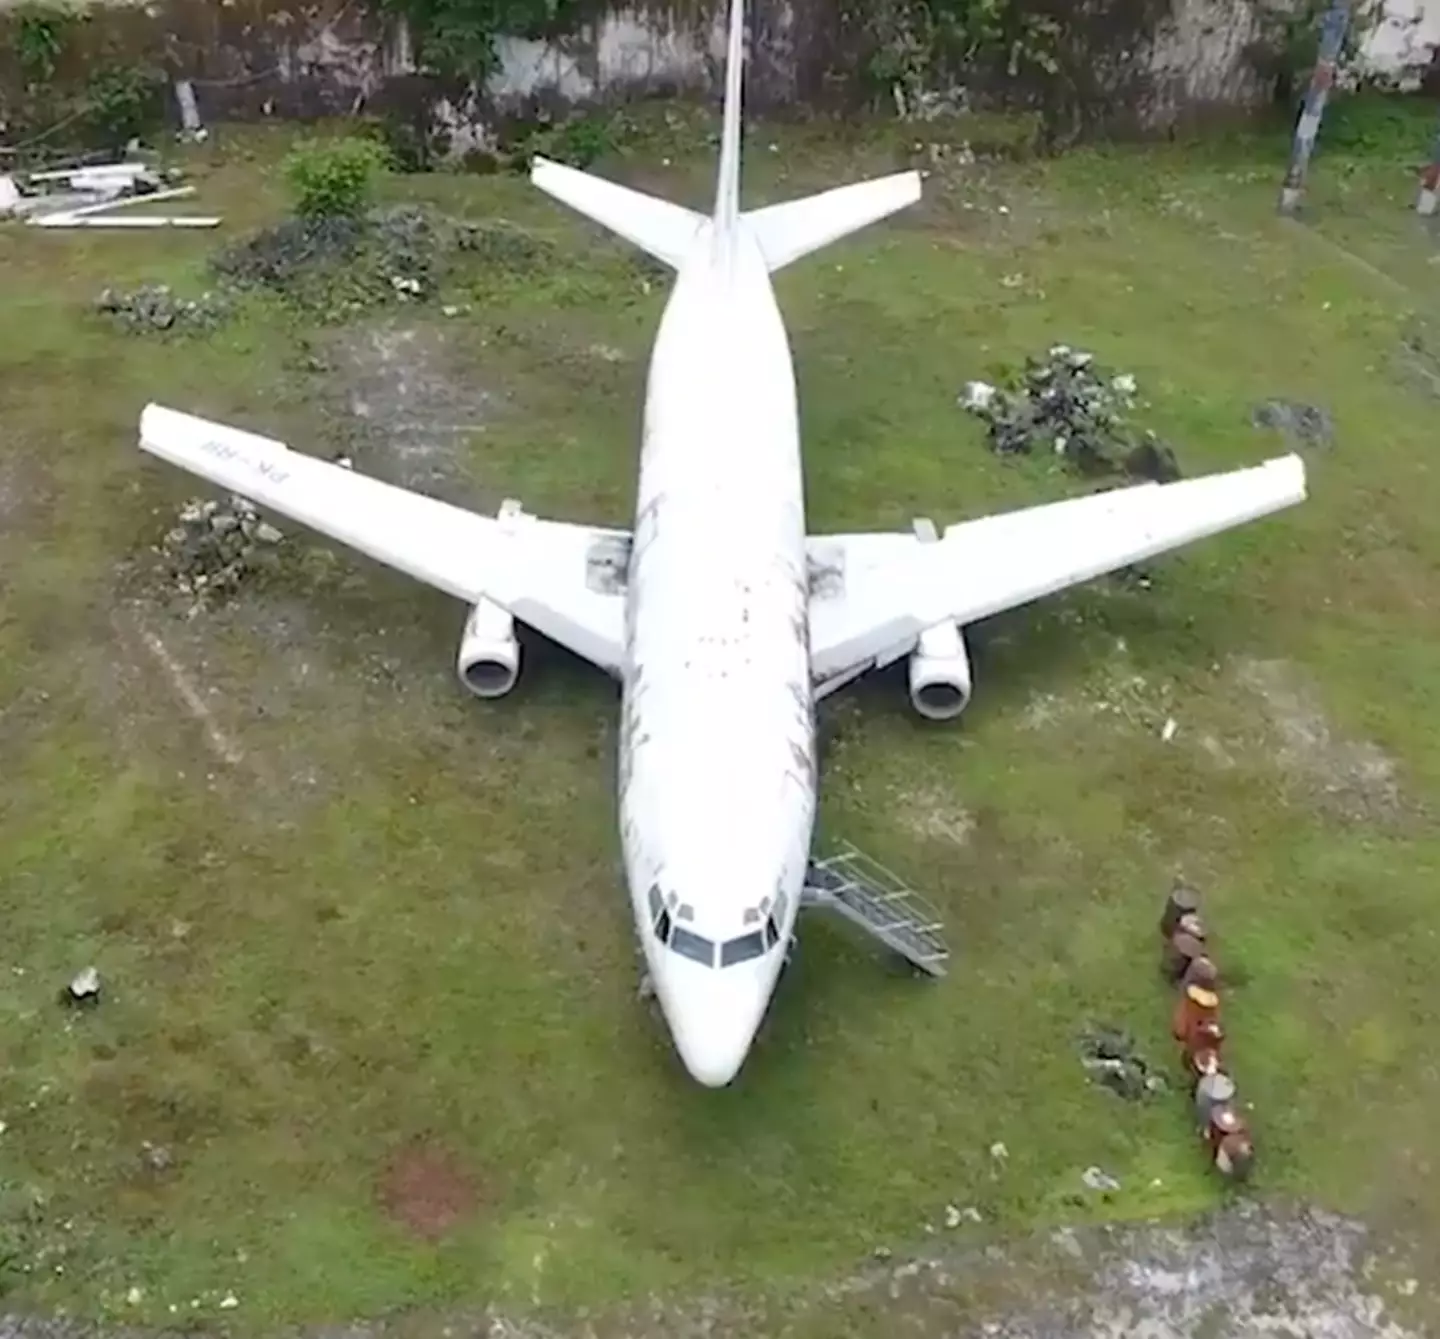 No one knows how the Boeing 737 got there.